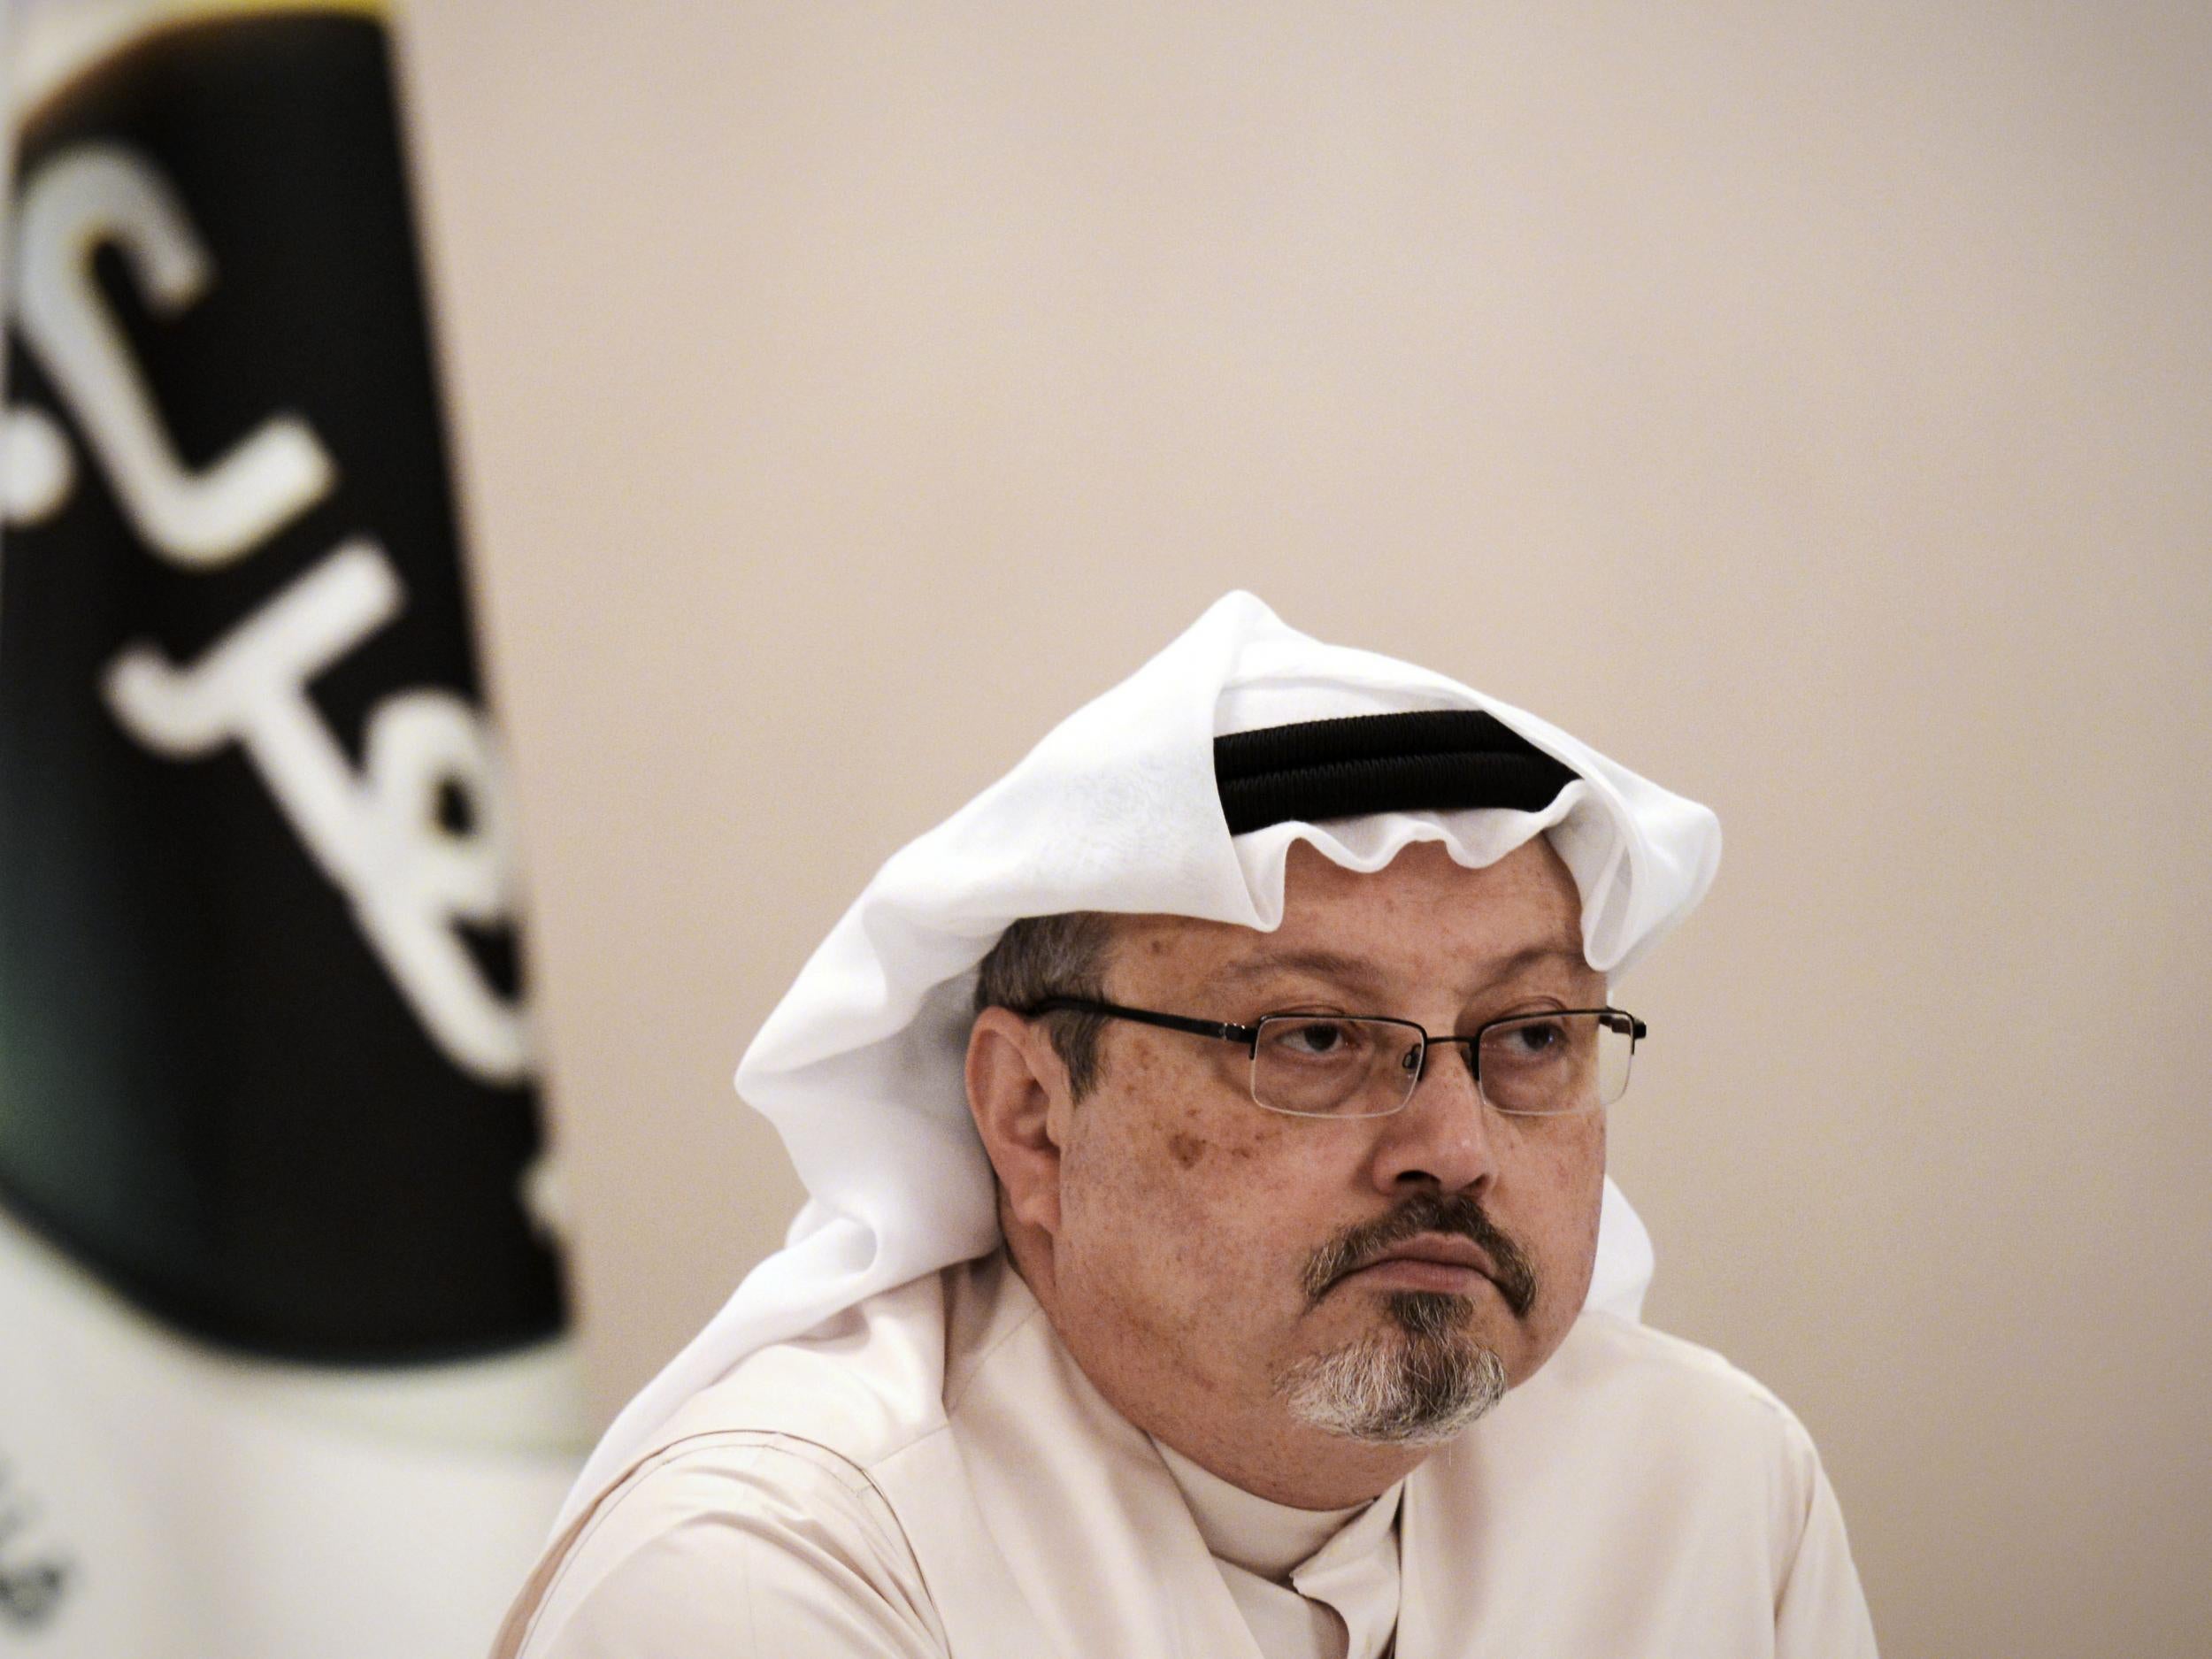 Khashoggi was barred from his job as a journalist after writing expository articles about the crown prince